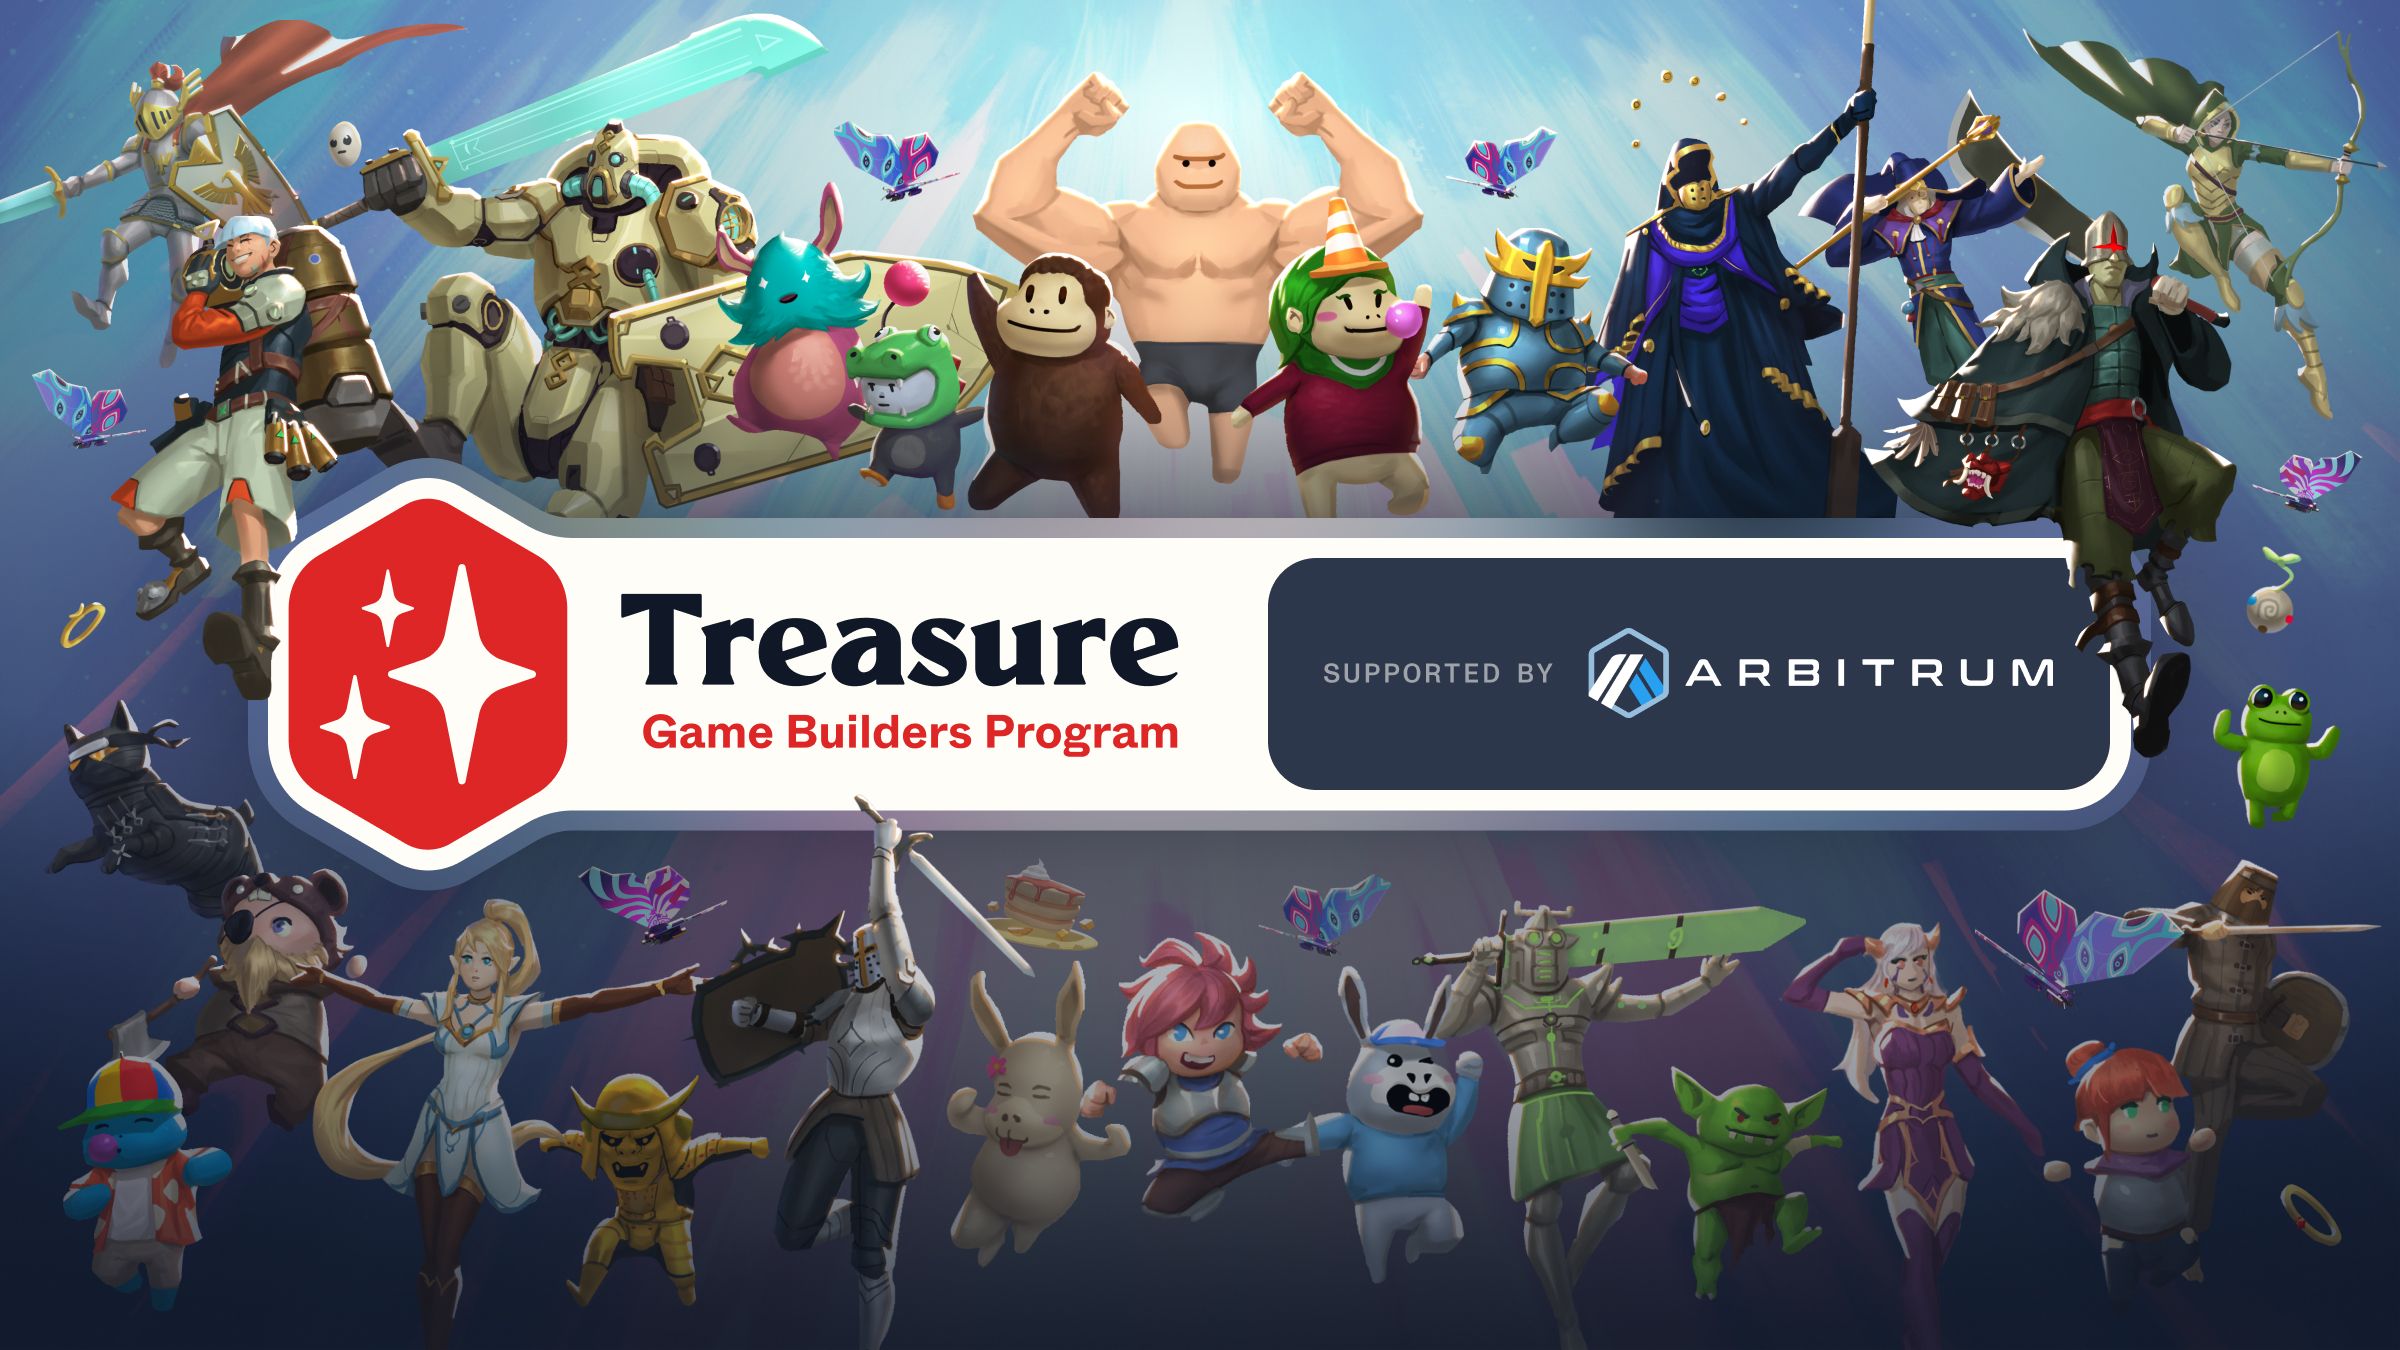 The Arrival of the 'Nintendo' in the Cryptocurrency World? TreasureDAO to Redefine NFT Gaming